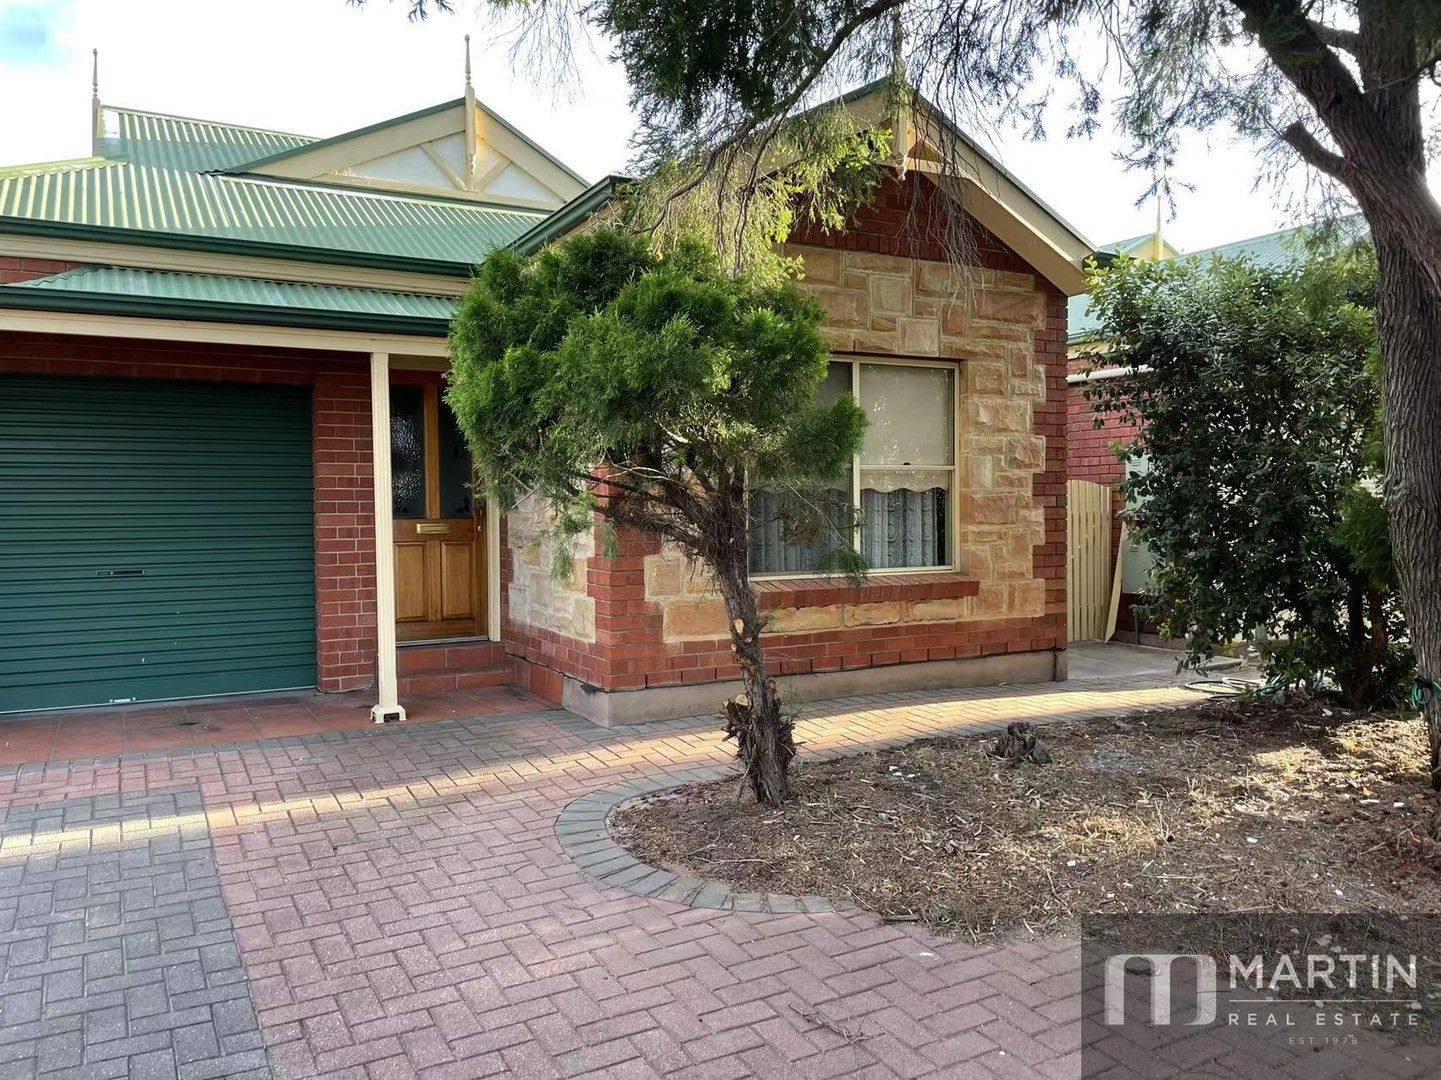 2 bedrooms House in 1/130 Gorge Road NEWTON SA, 5074